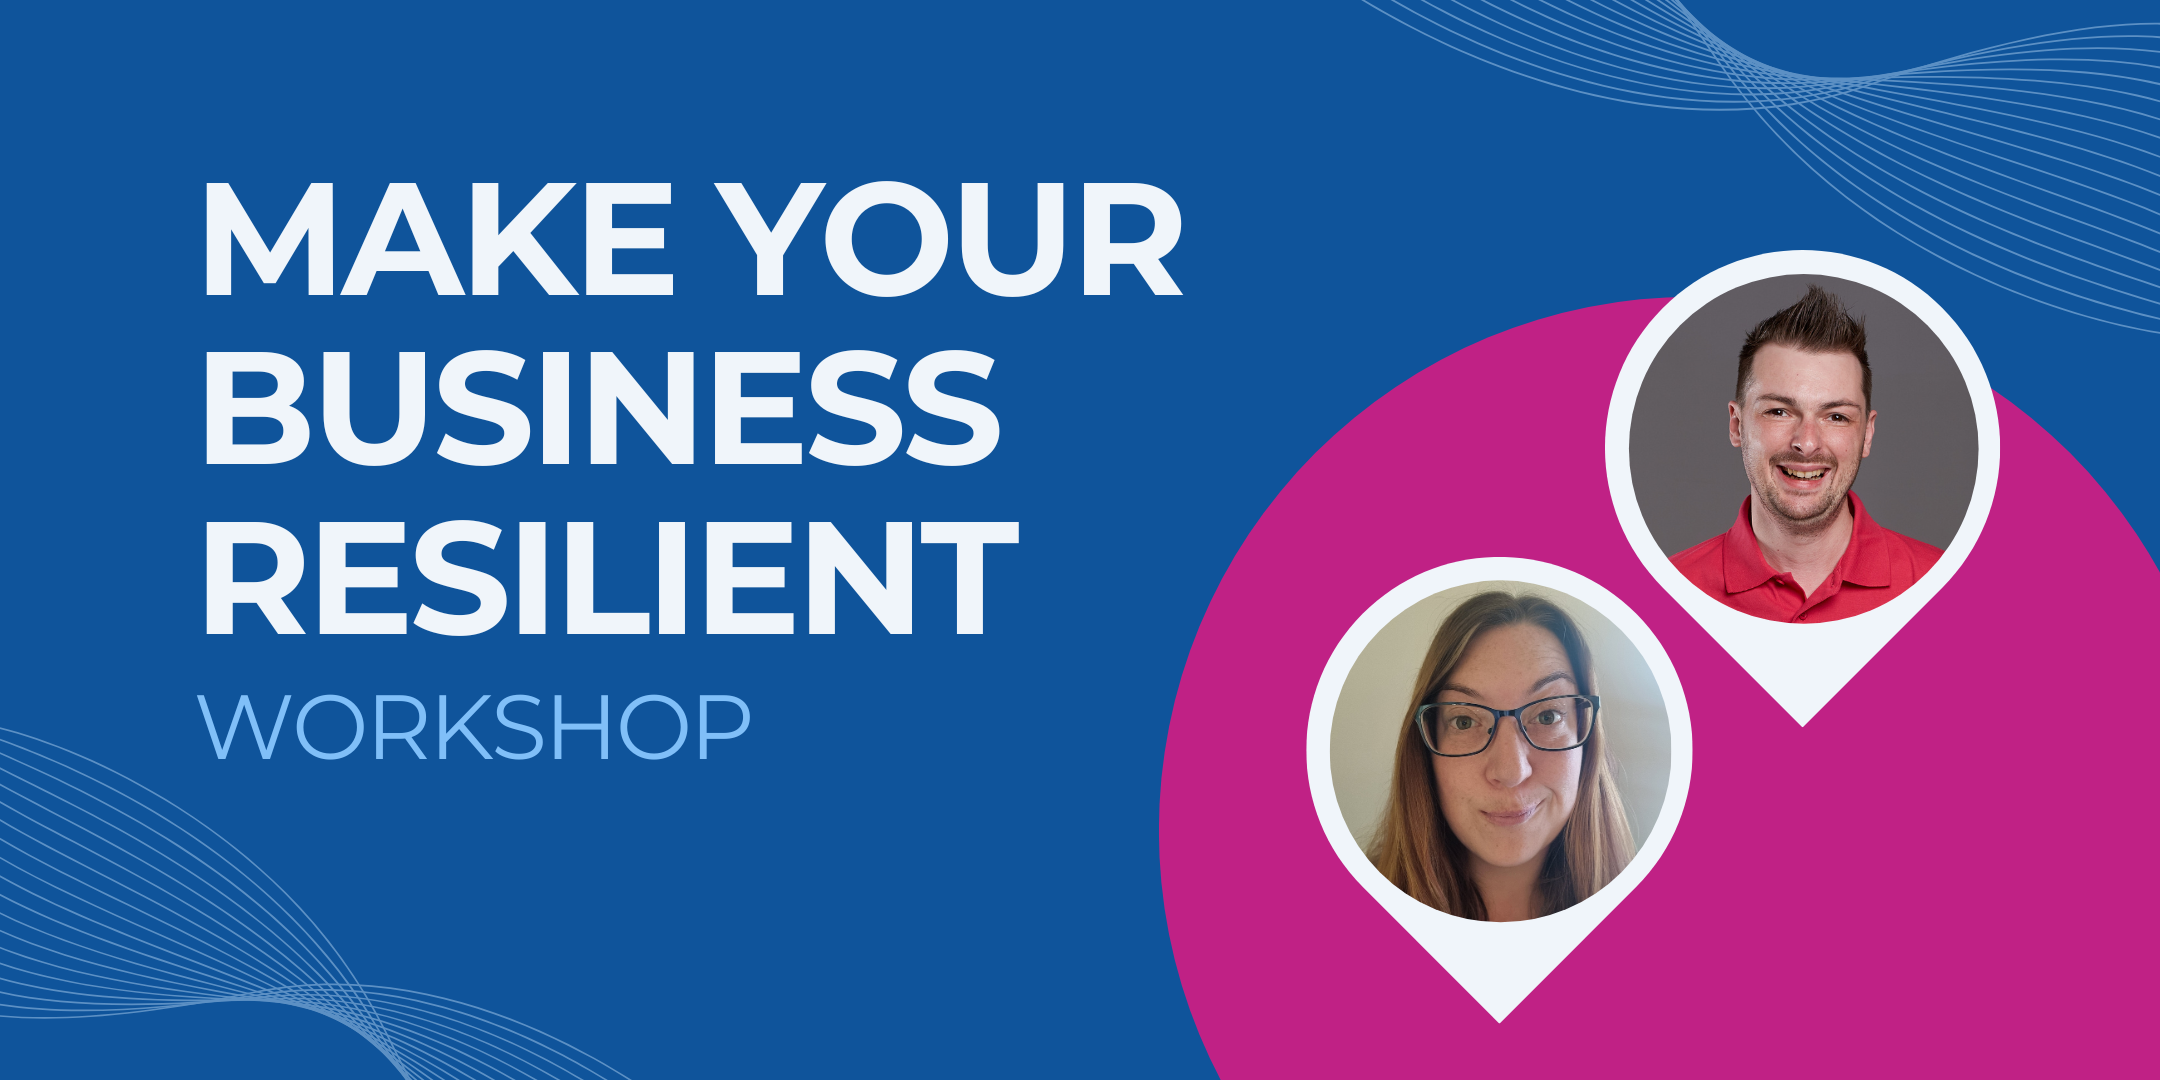 Workshop: Make Your Business Resilient